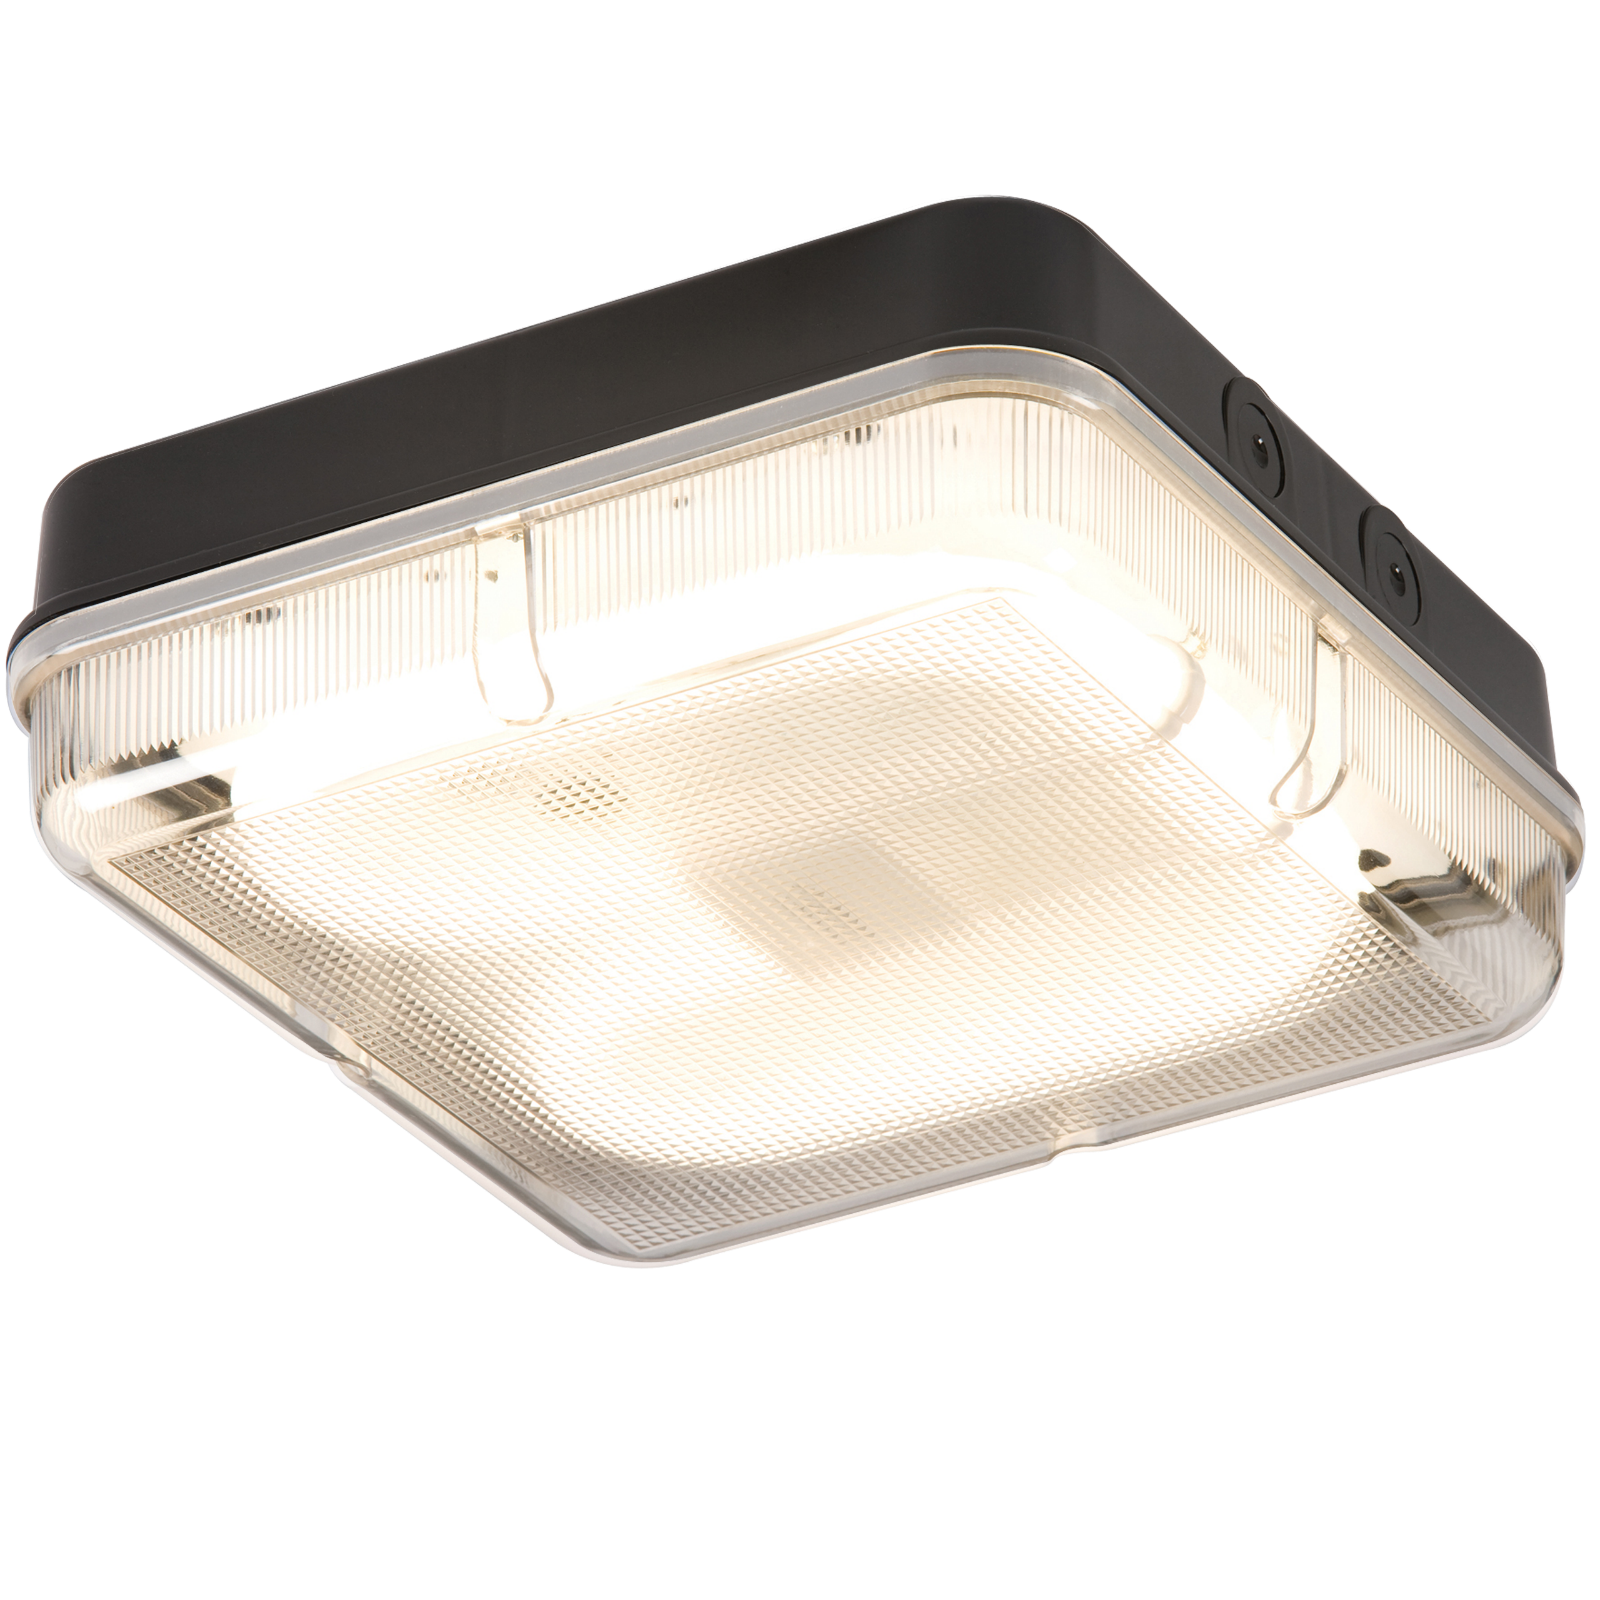 IP65 28W HF Square Emergency Bulkhead With Prismatic Diffuser And Black Base - TPS28BPEMHF 